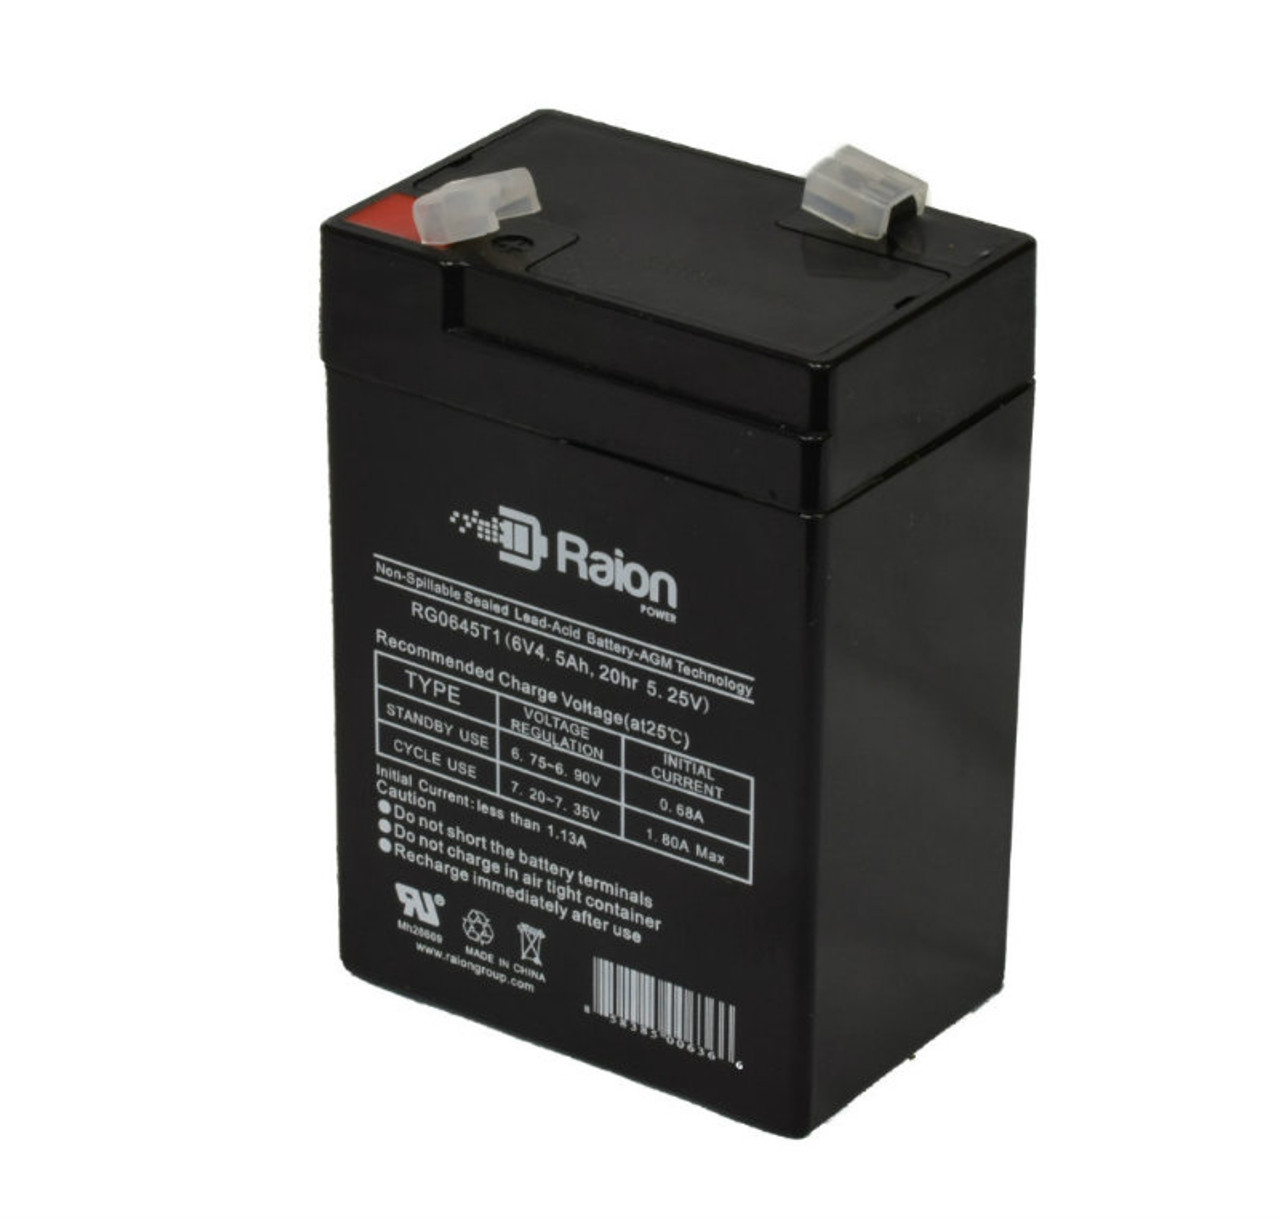 Raion Power RG0645T1 6V 4.5Ah Replacement Battery Cartridge for Criticare Systems 504Us Pulse Oximeters